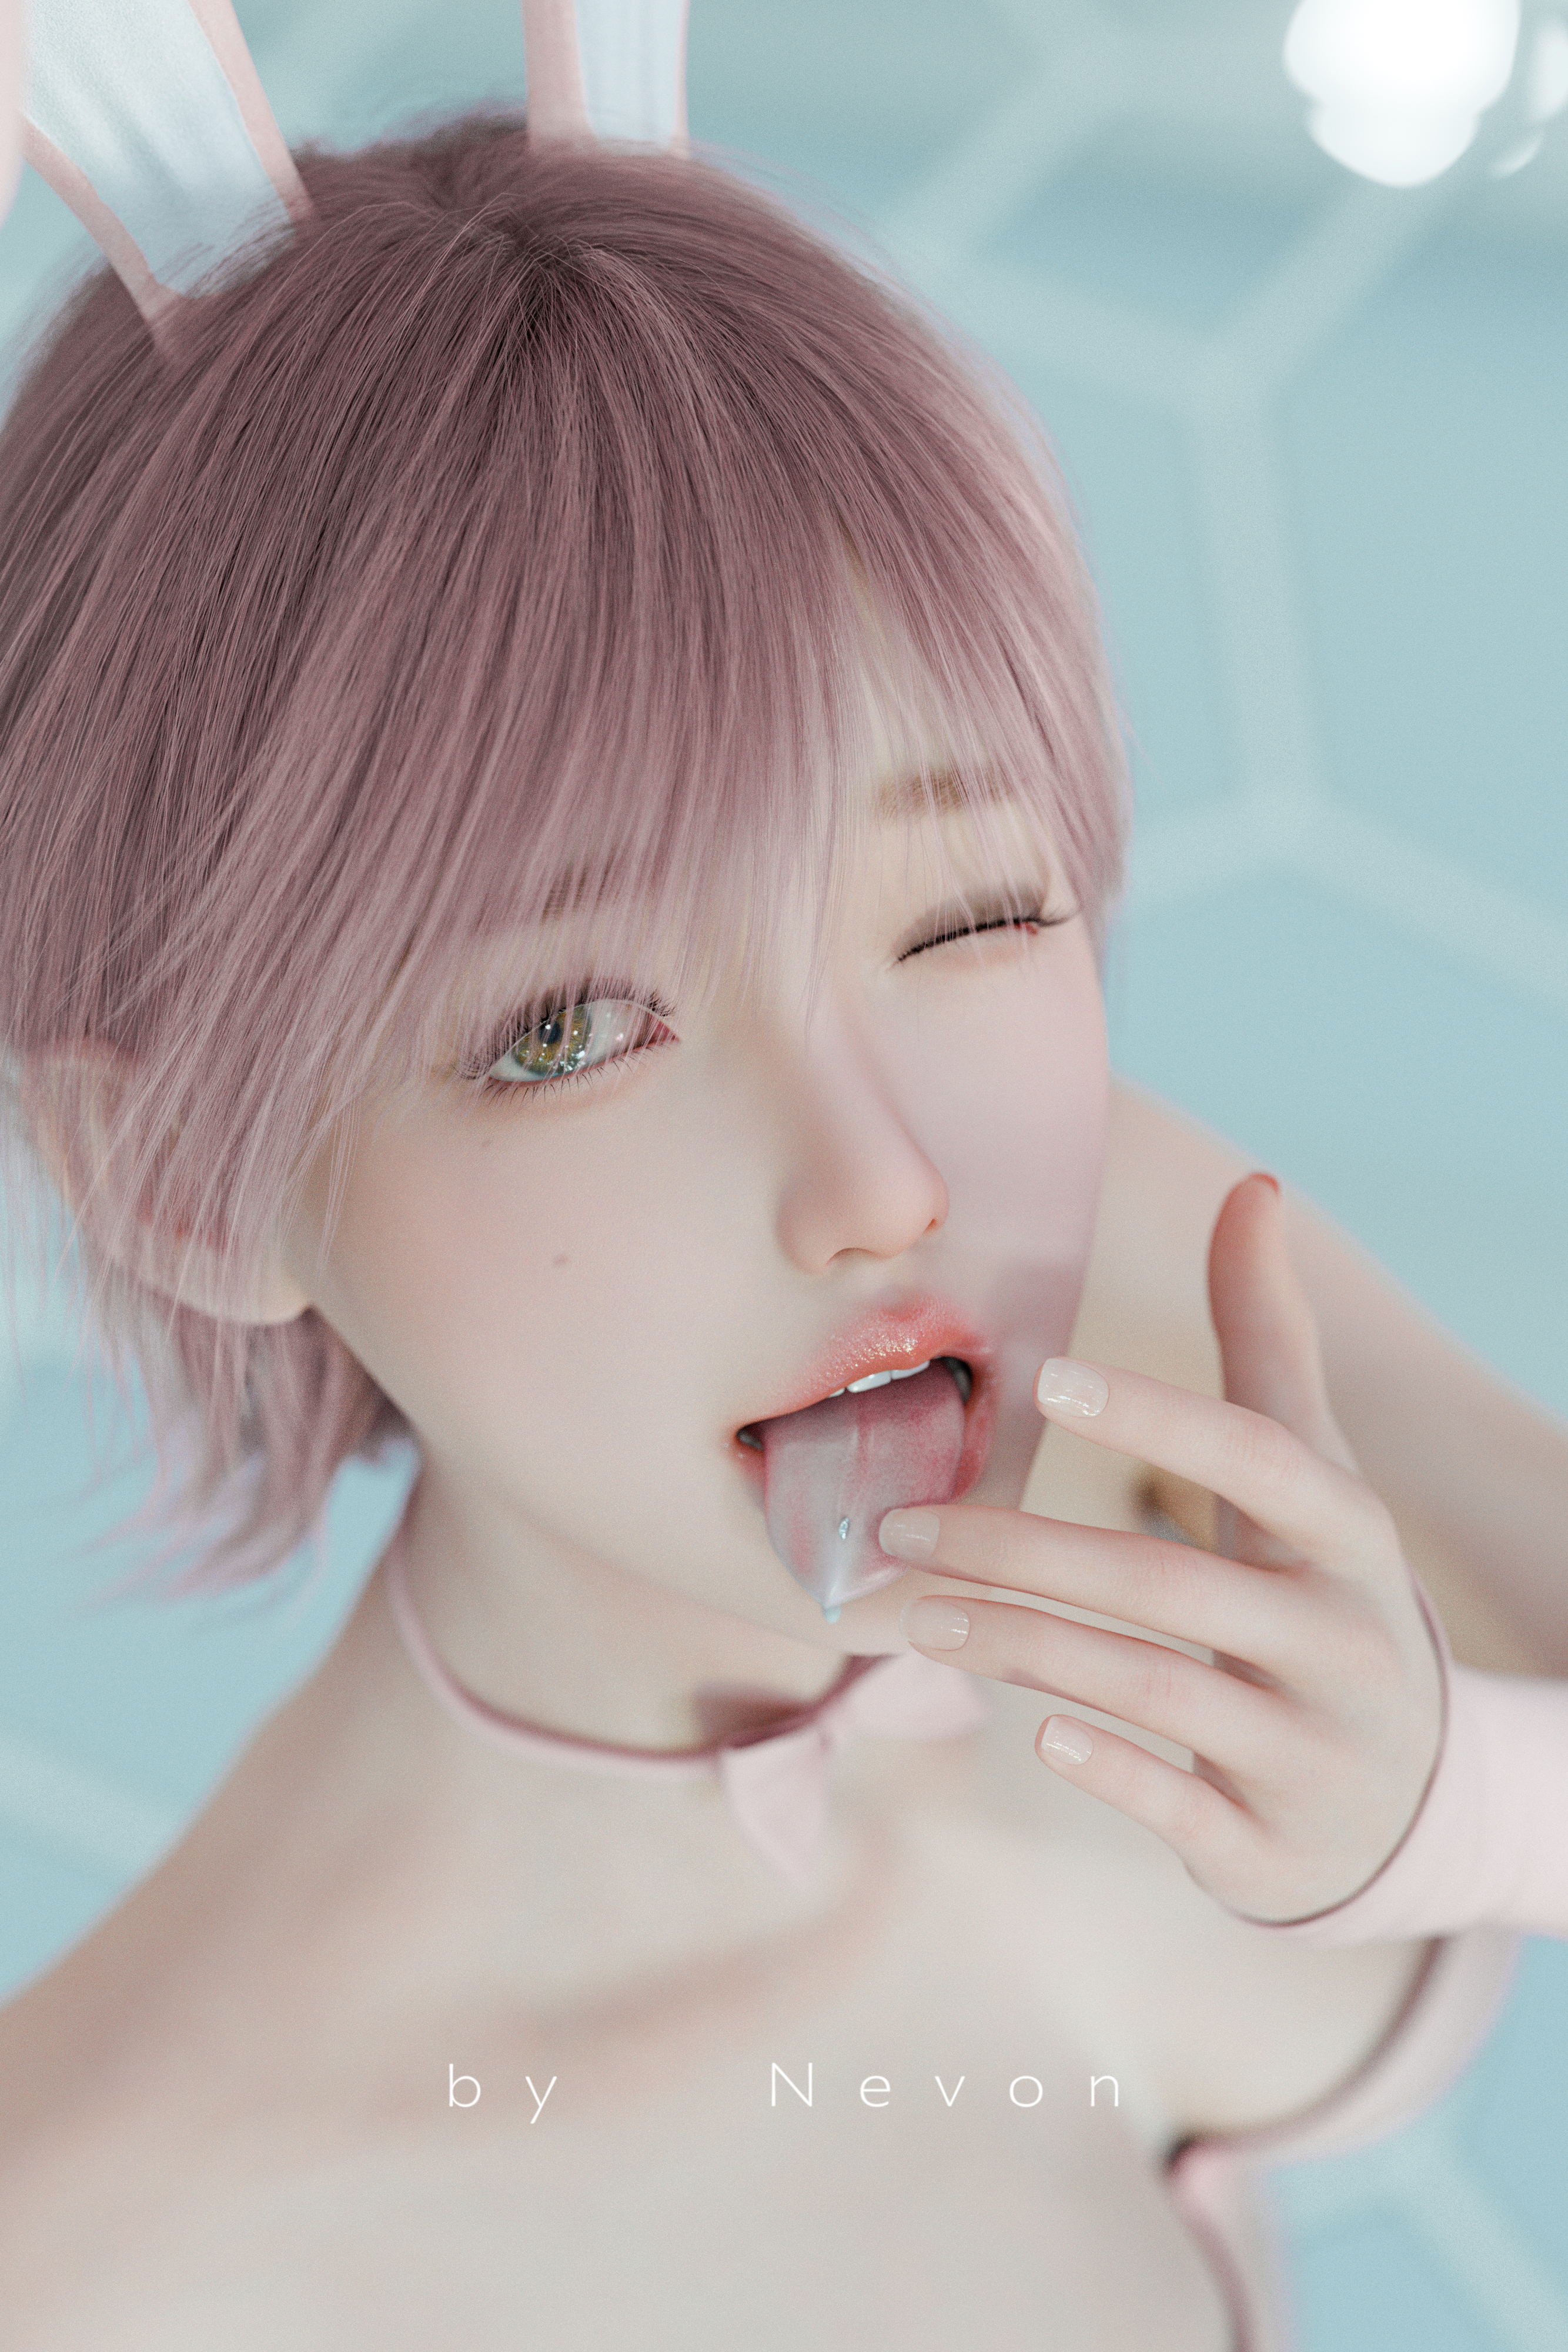 General 2667x4000 Nevon digital art illustration women short hair portrait display CGI Asian bunny ears suggestive watermarked looking at viewer wink tongue out